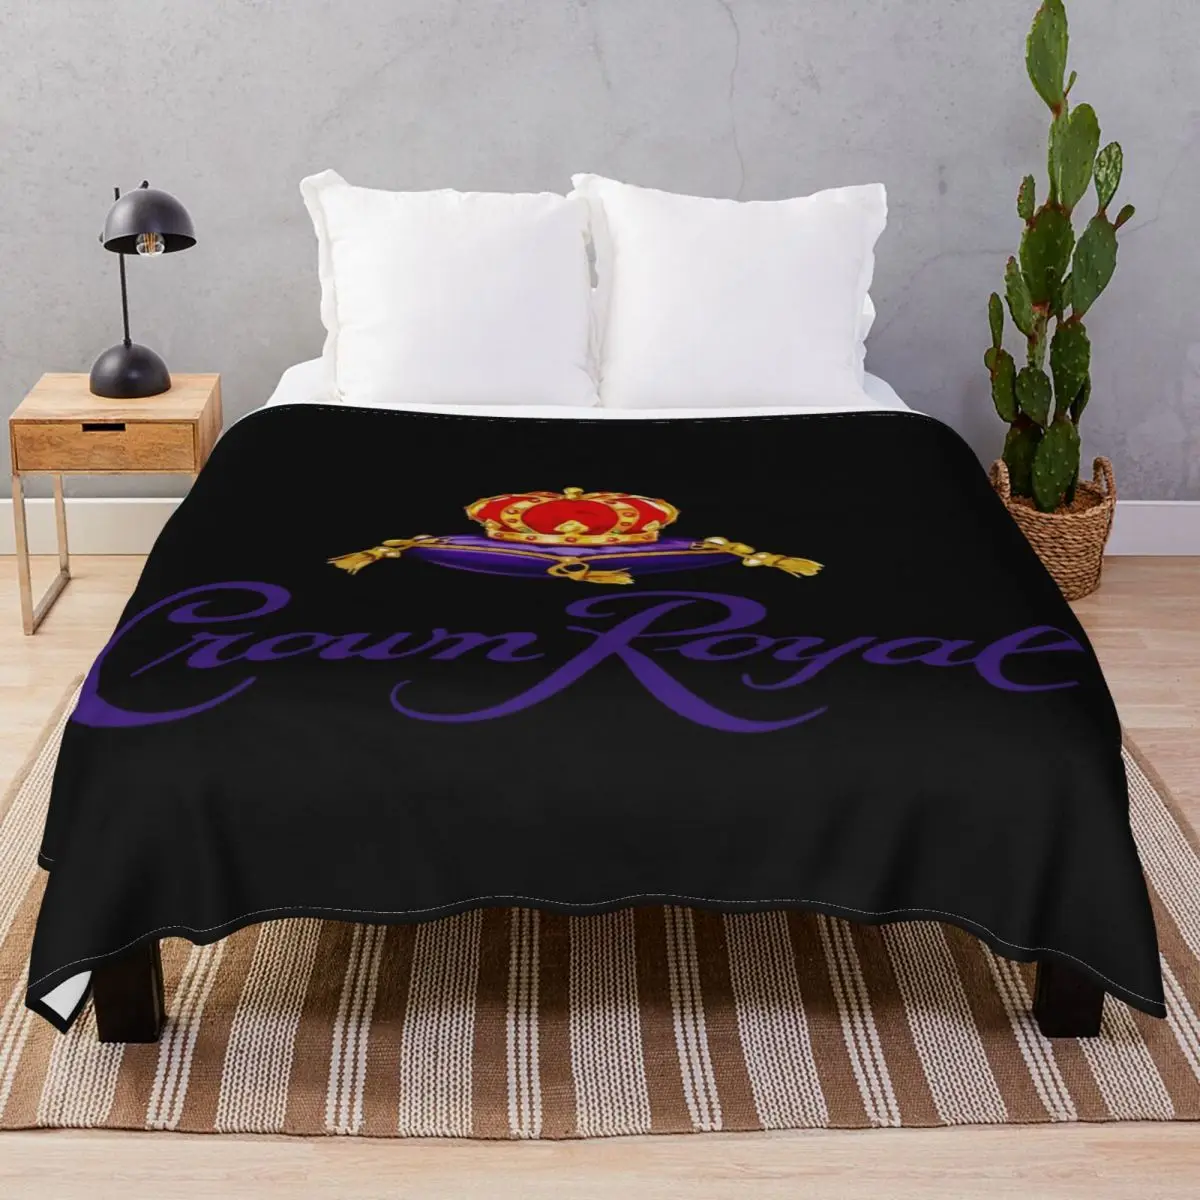 Crown Royal Blankets Flannel Summer Lightweight Thin Throw Blanket for Bed Home Couch Travel Office